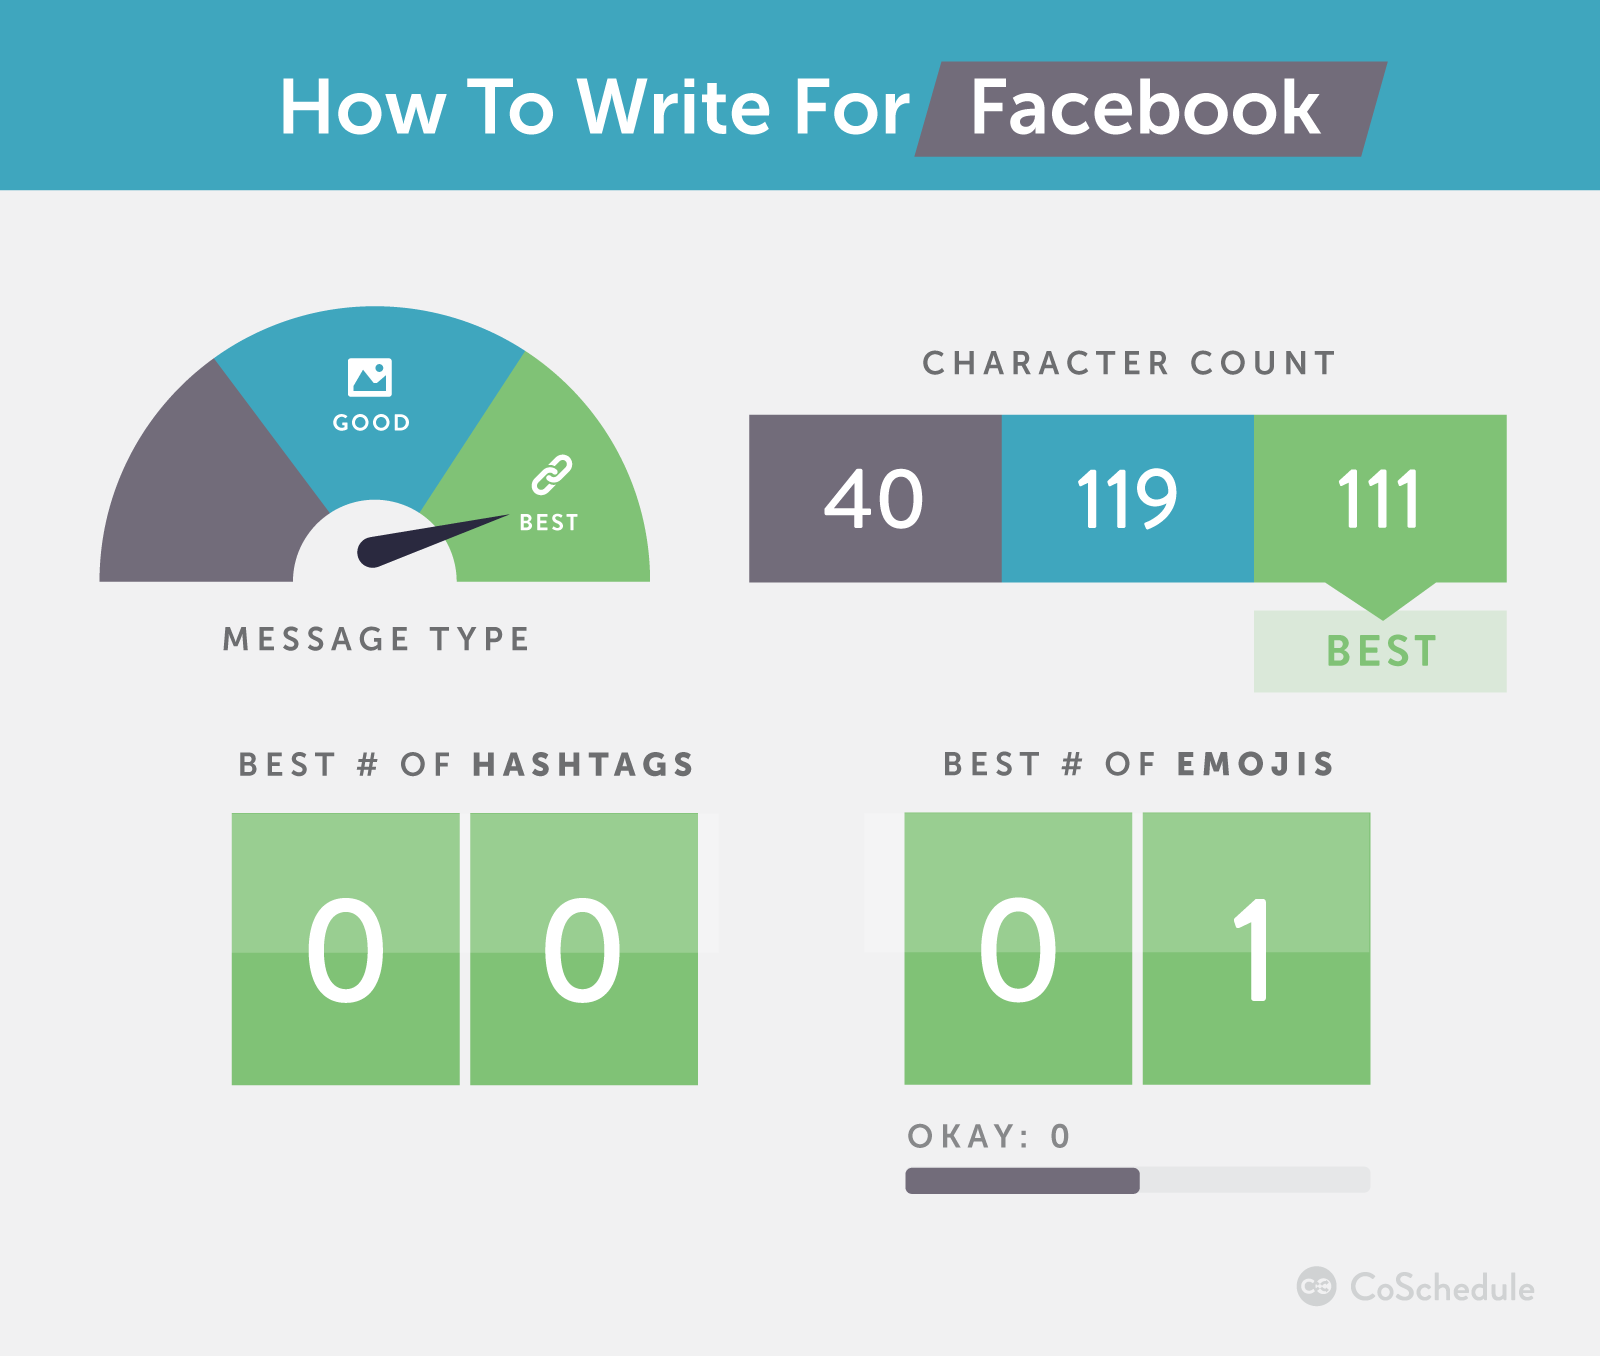 How to write for Facebook